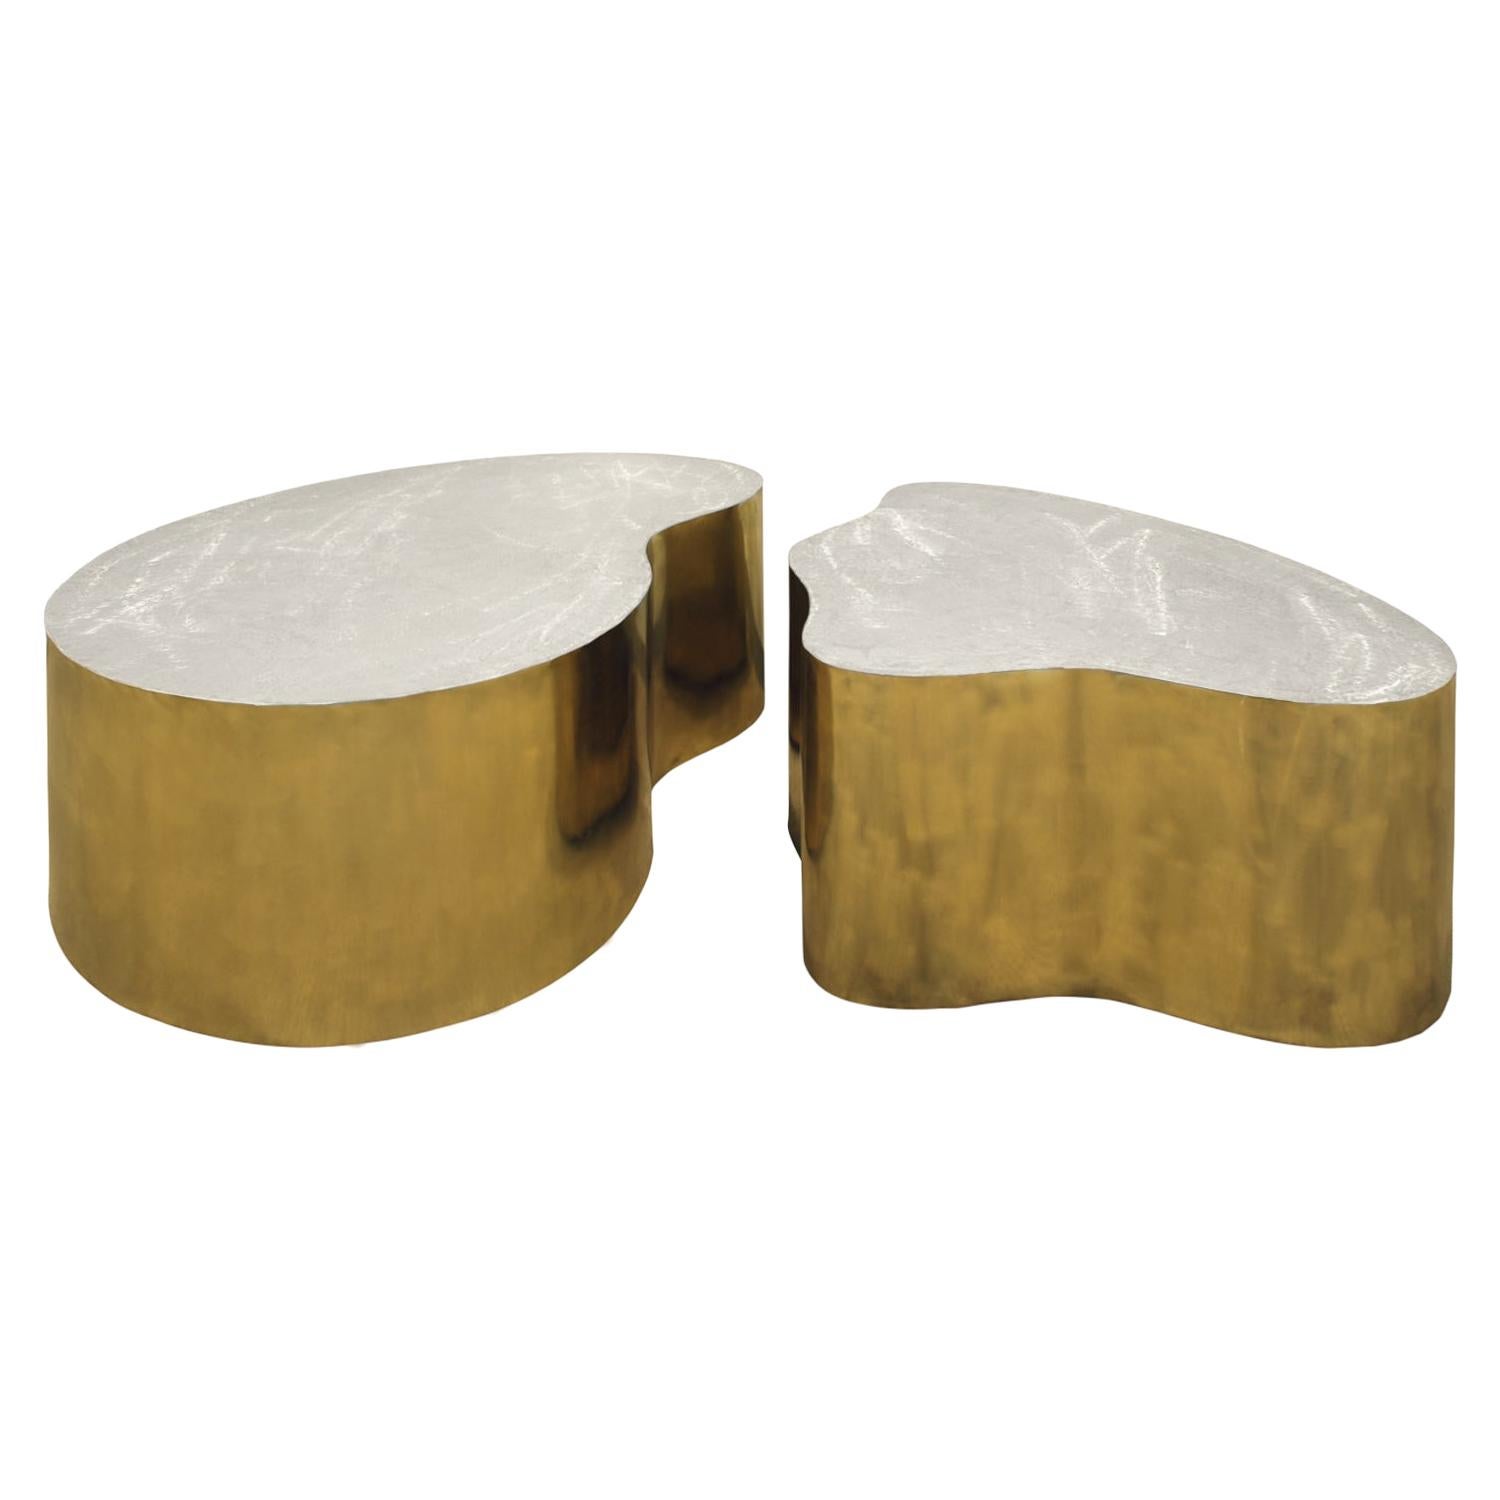 Silas Seandel Pair of Coffee Tables in Brass and Brushed Steel, 1980s 'Signed'